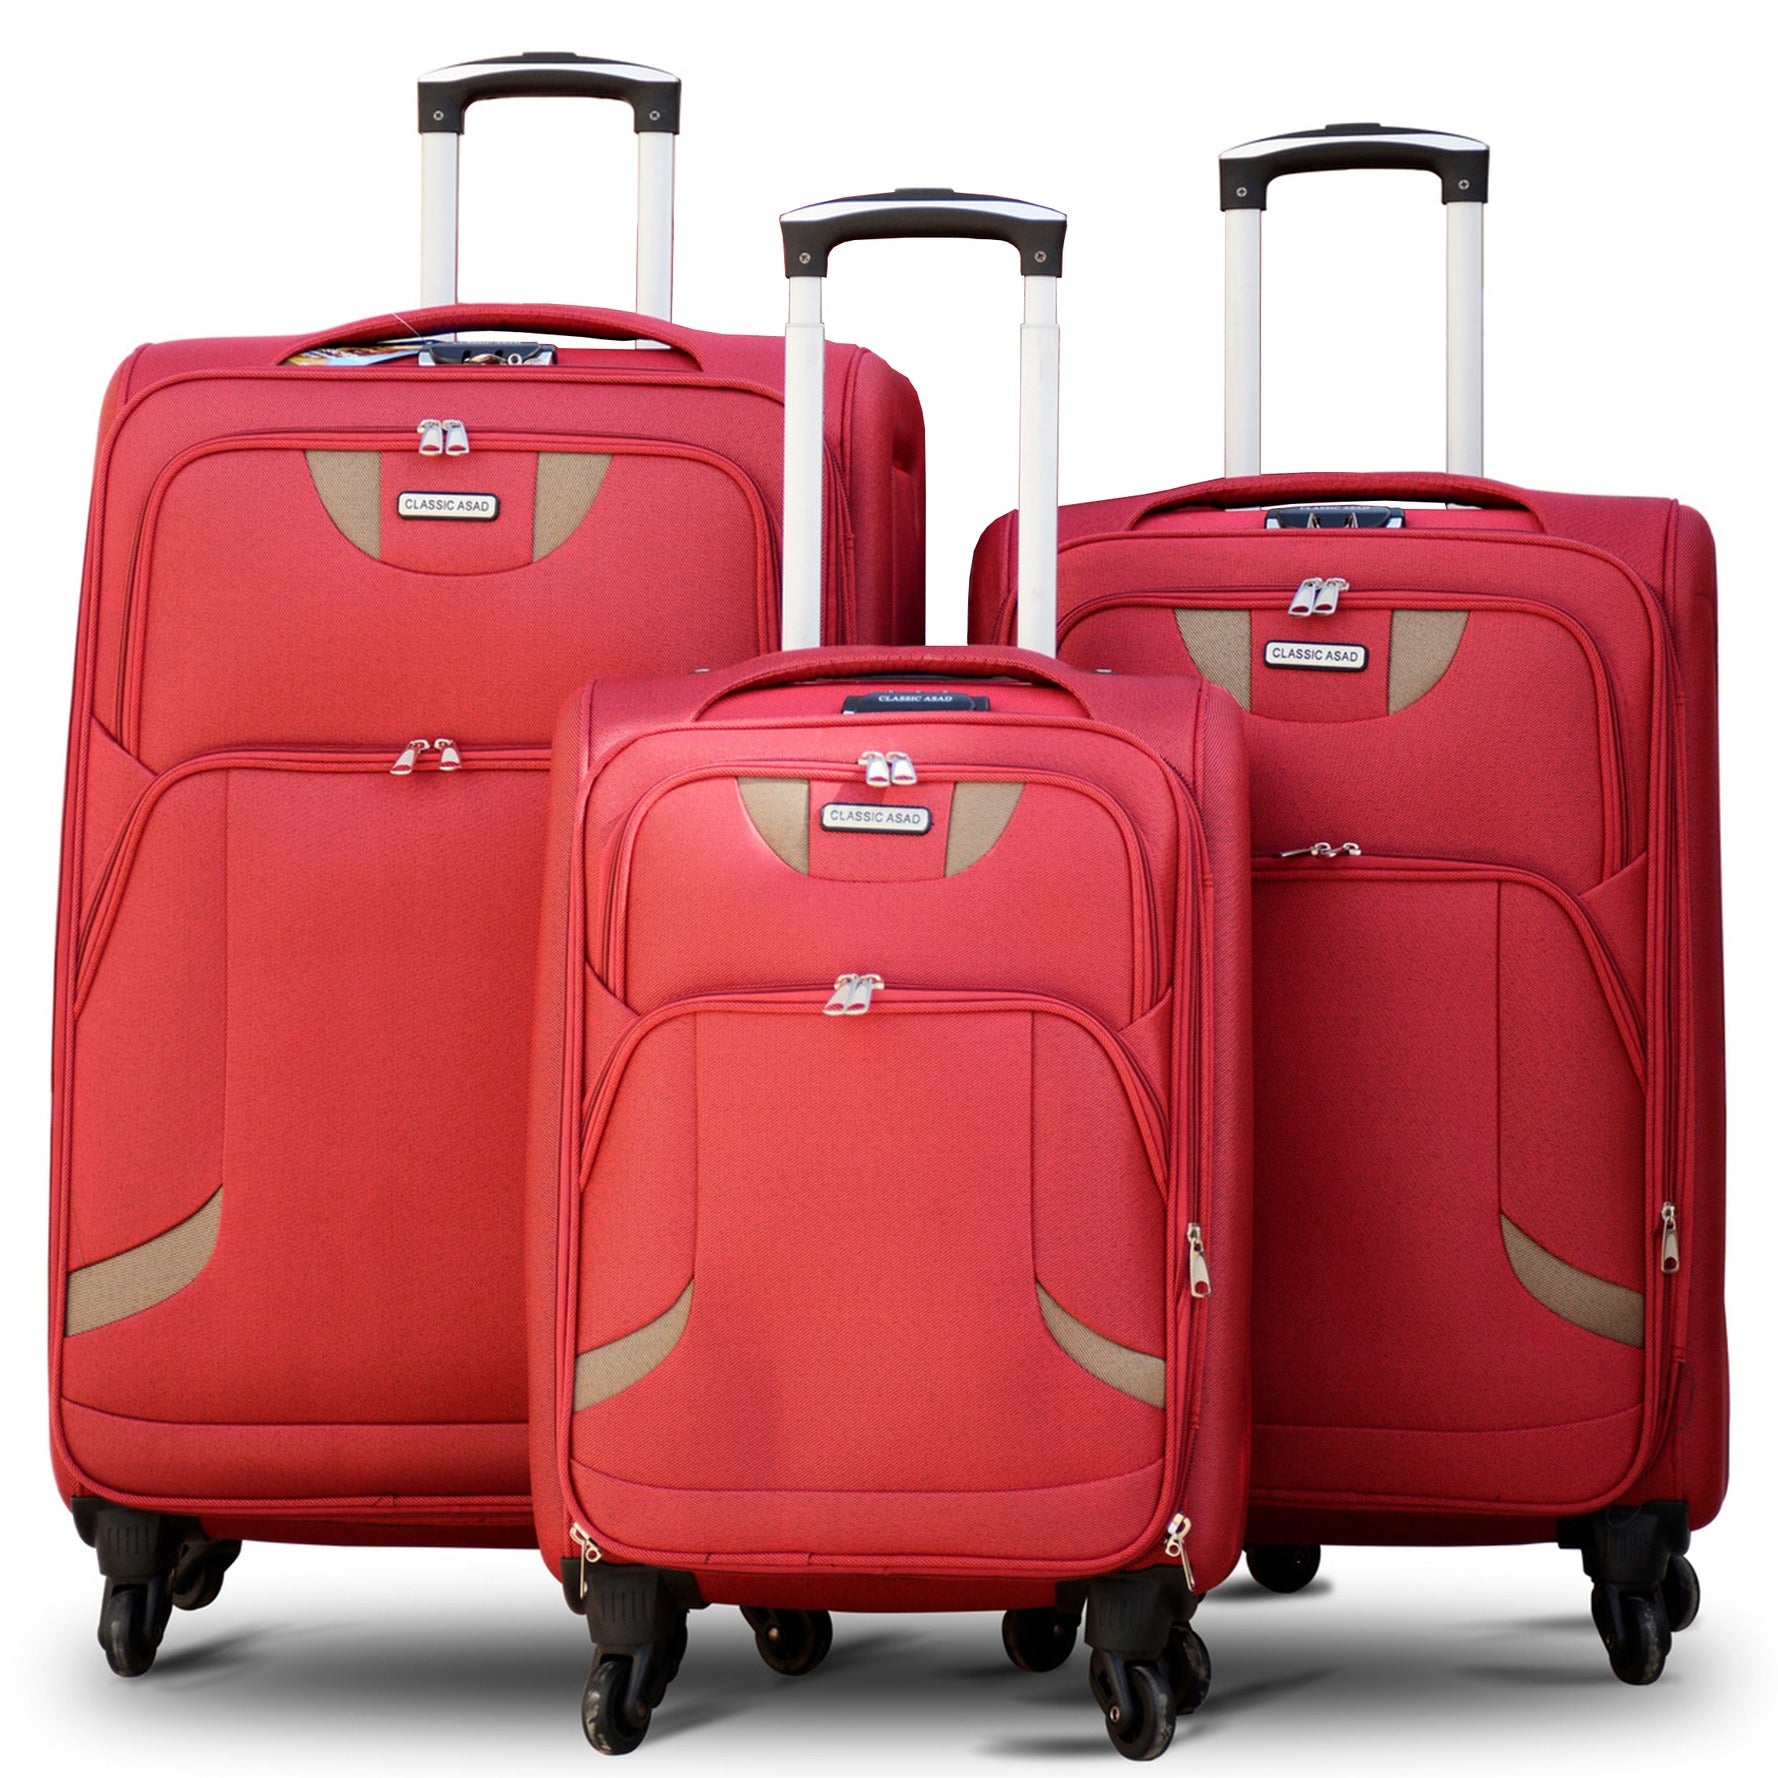 Soft Material Soft Shell Lightweight 4 Pcs Set 20” 24” 28" 32 Inches Luggage Bag | 4 Wheels | New Ace Best Red